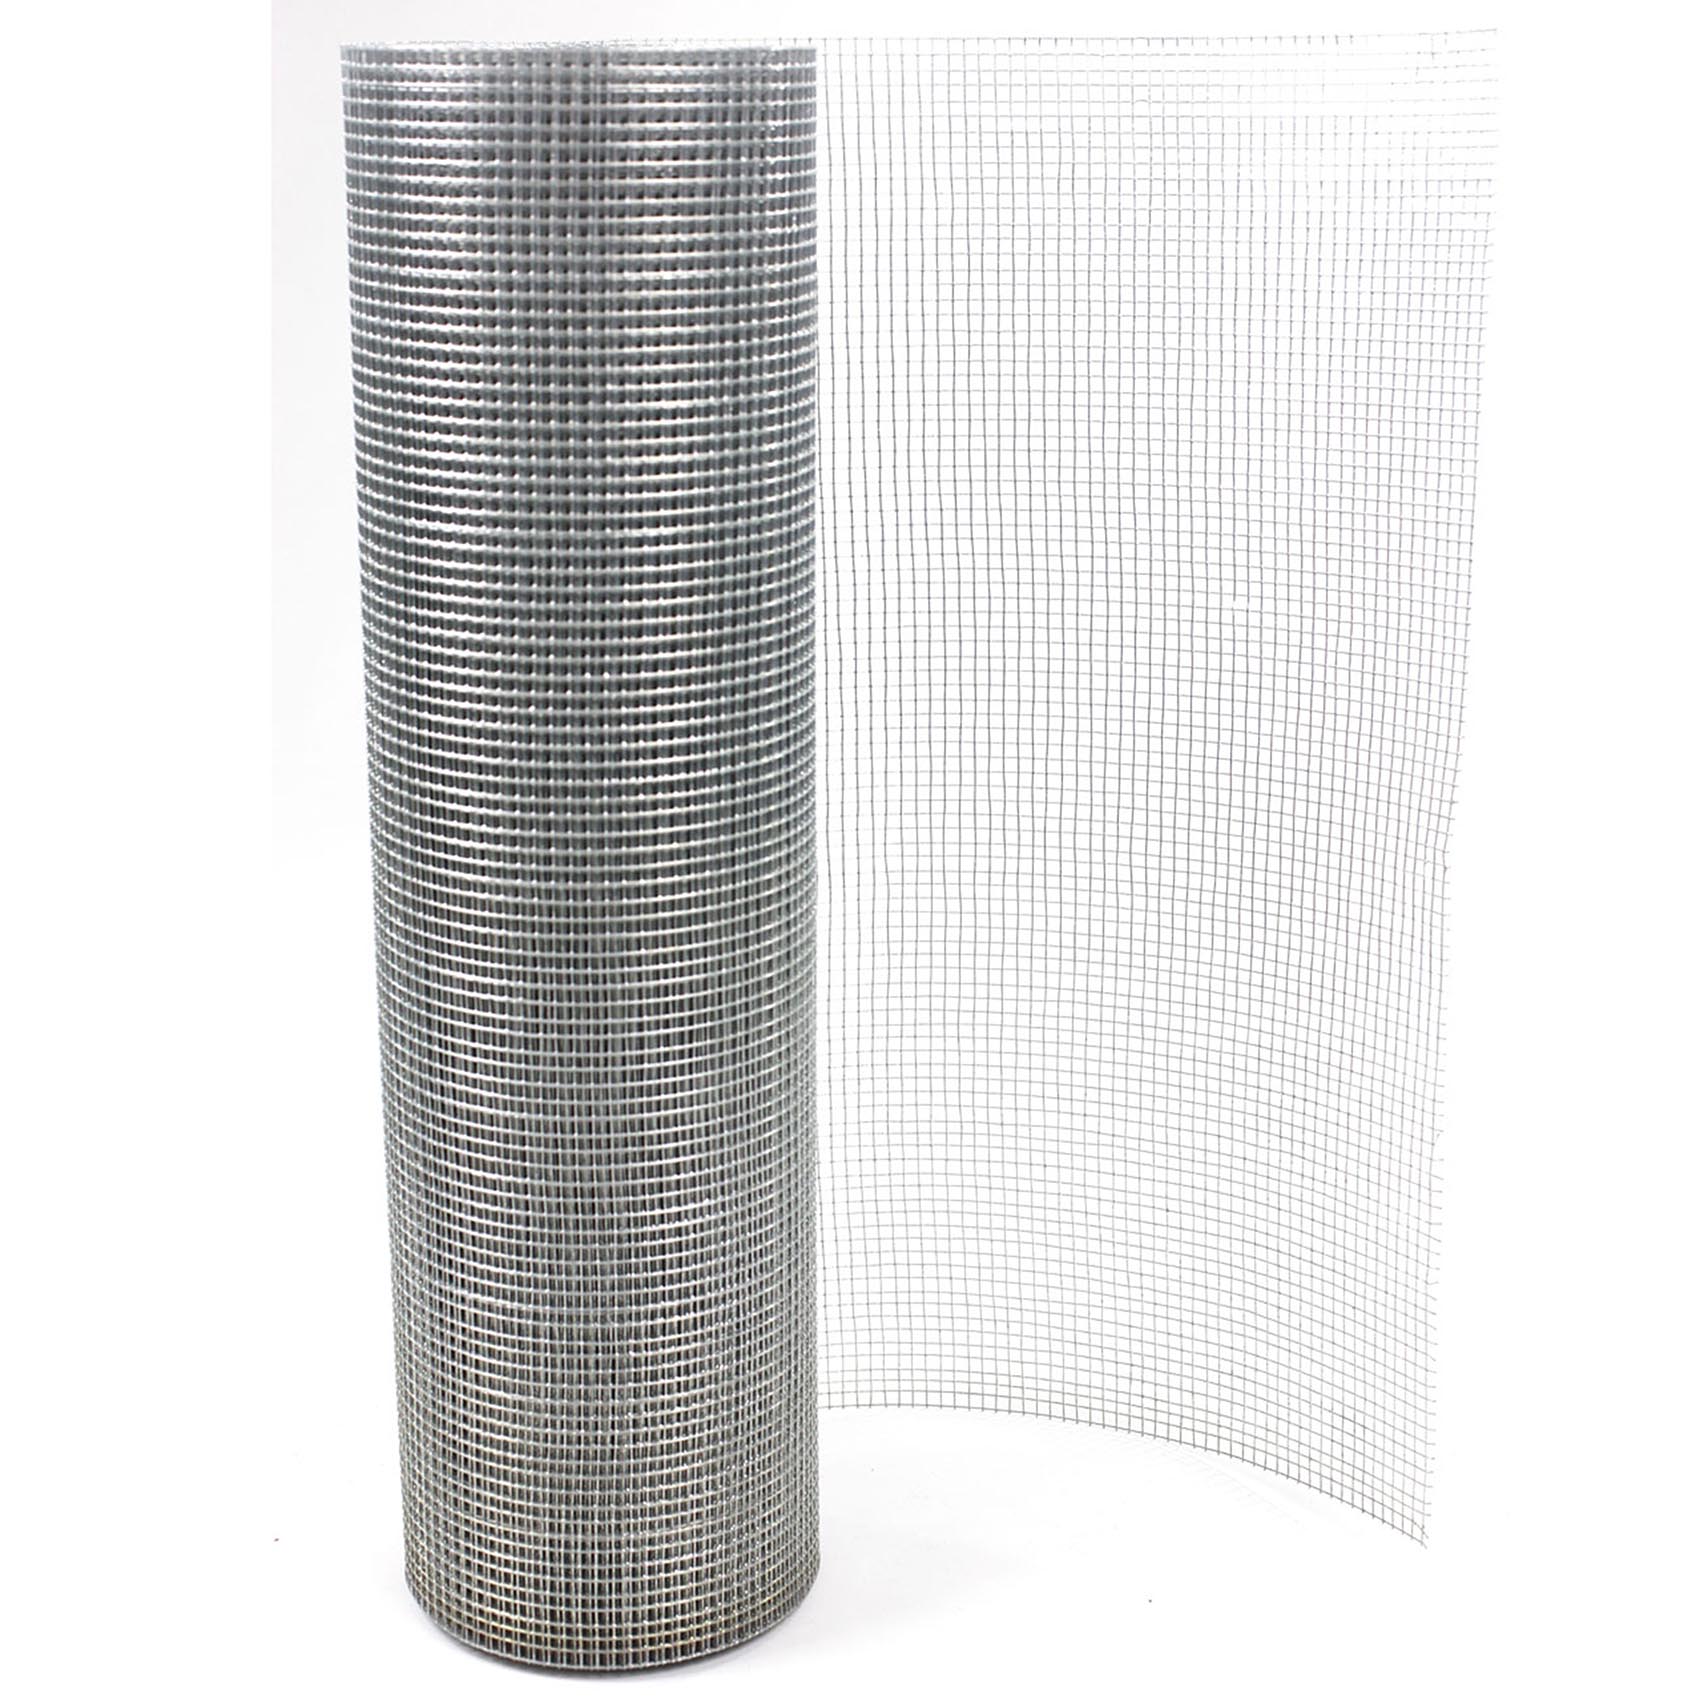 Welded Wire Mesh 1/4" x 1/4" x 15m long Aviary Hutches 3 widths Easipet 